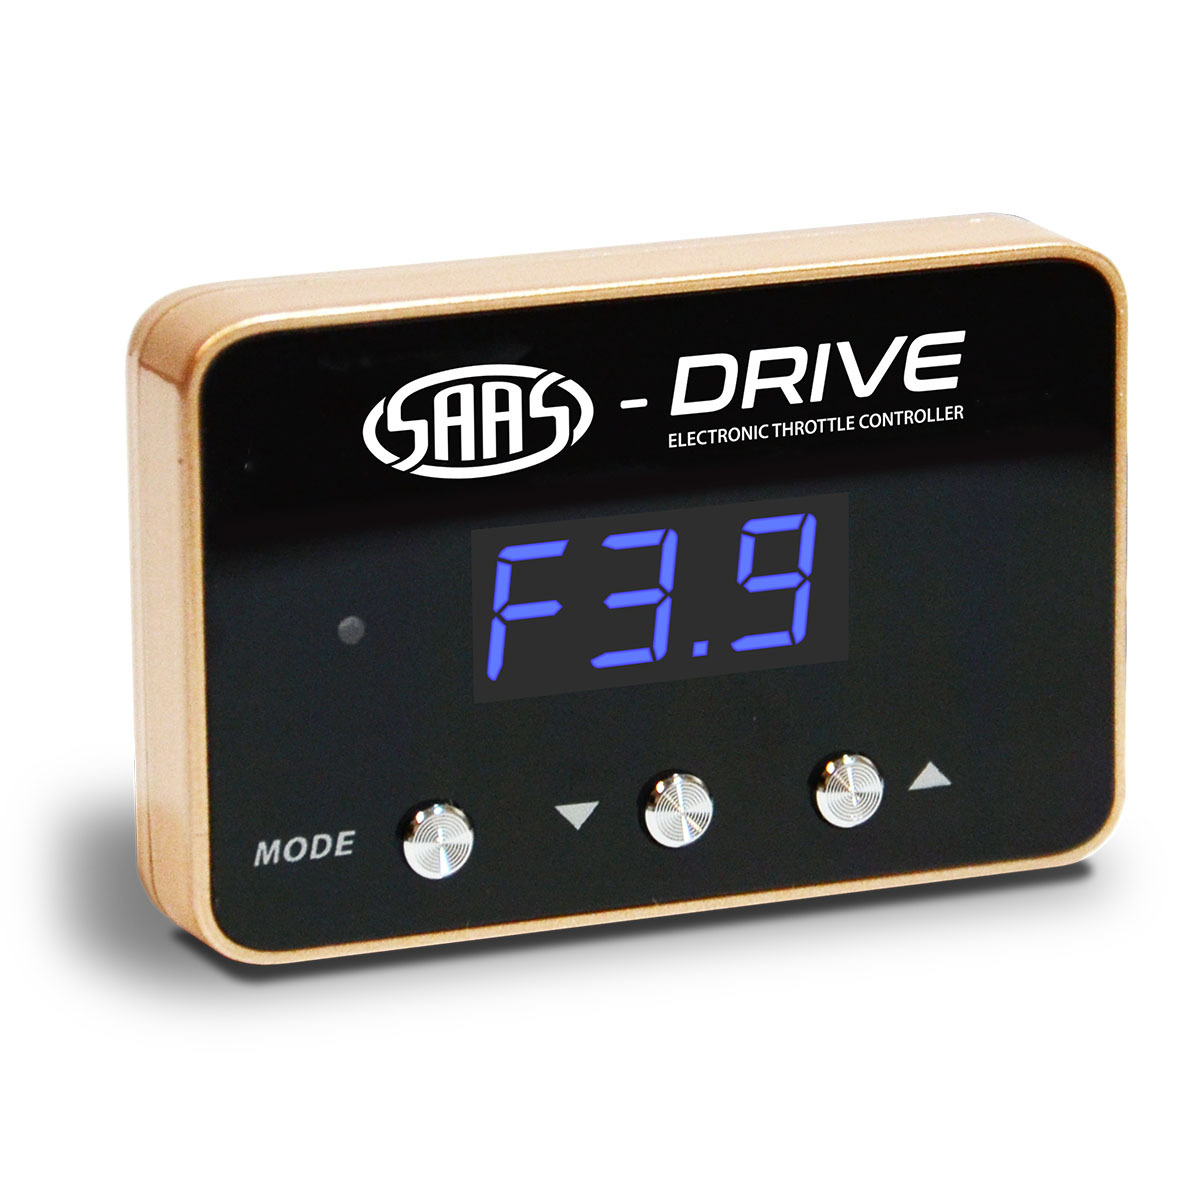 SAAS-Drive Colorado Rodeo DMax Throttle Controller